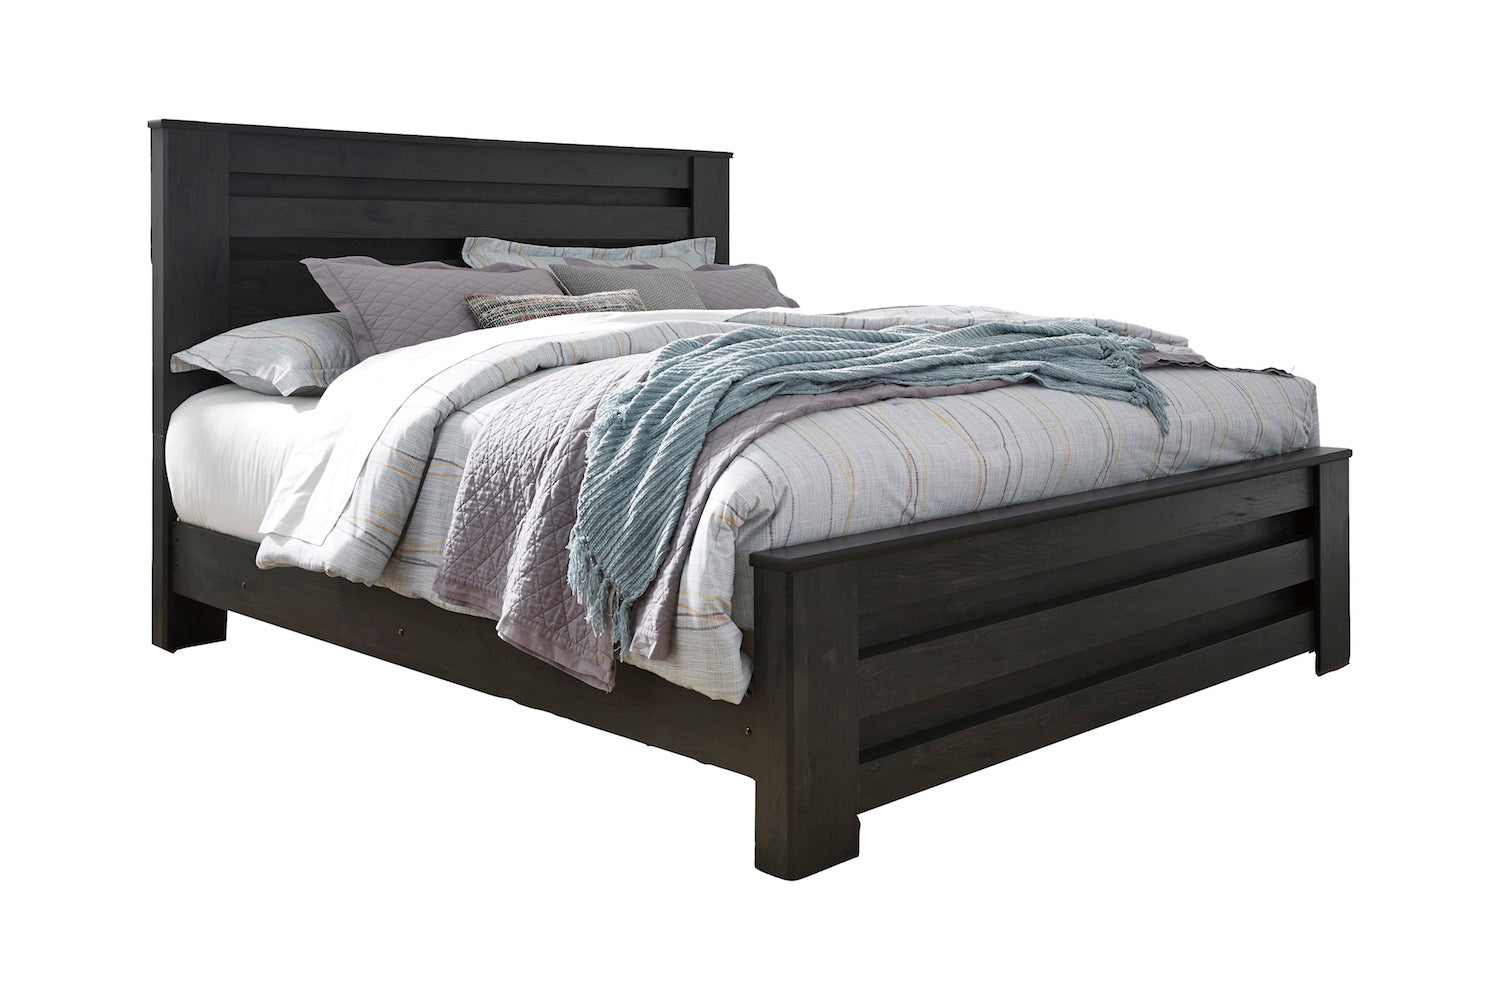 E King Poster Bed